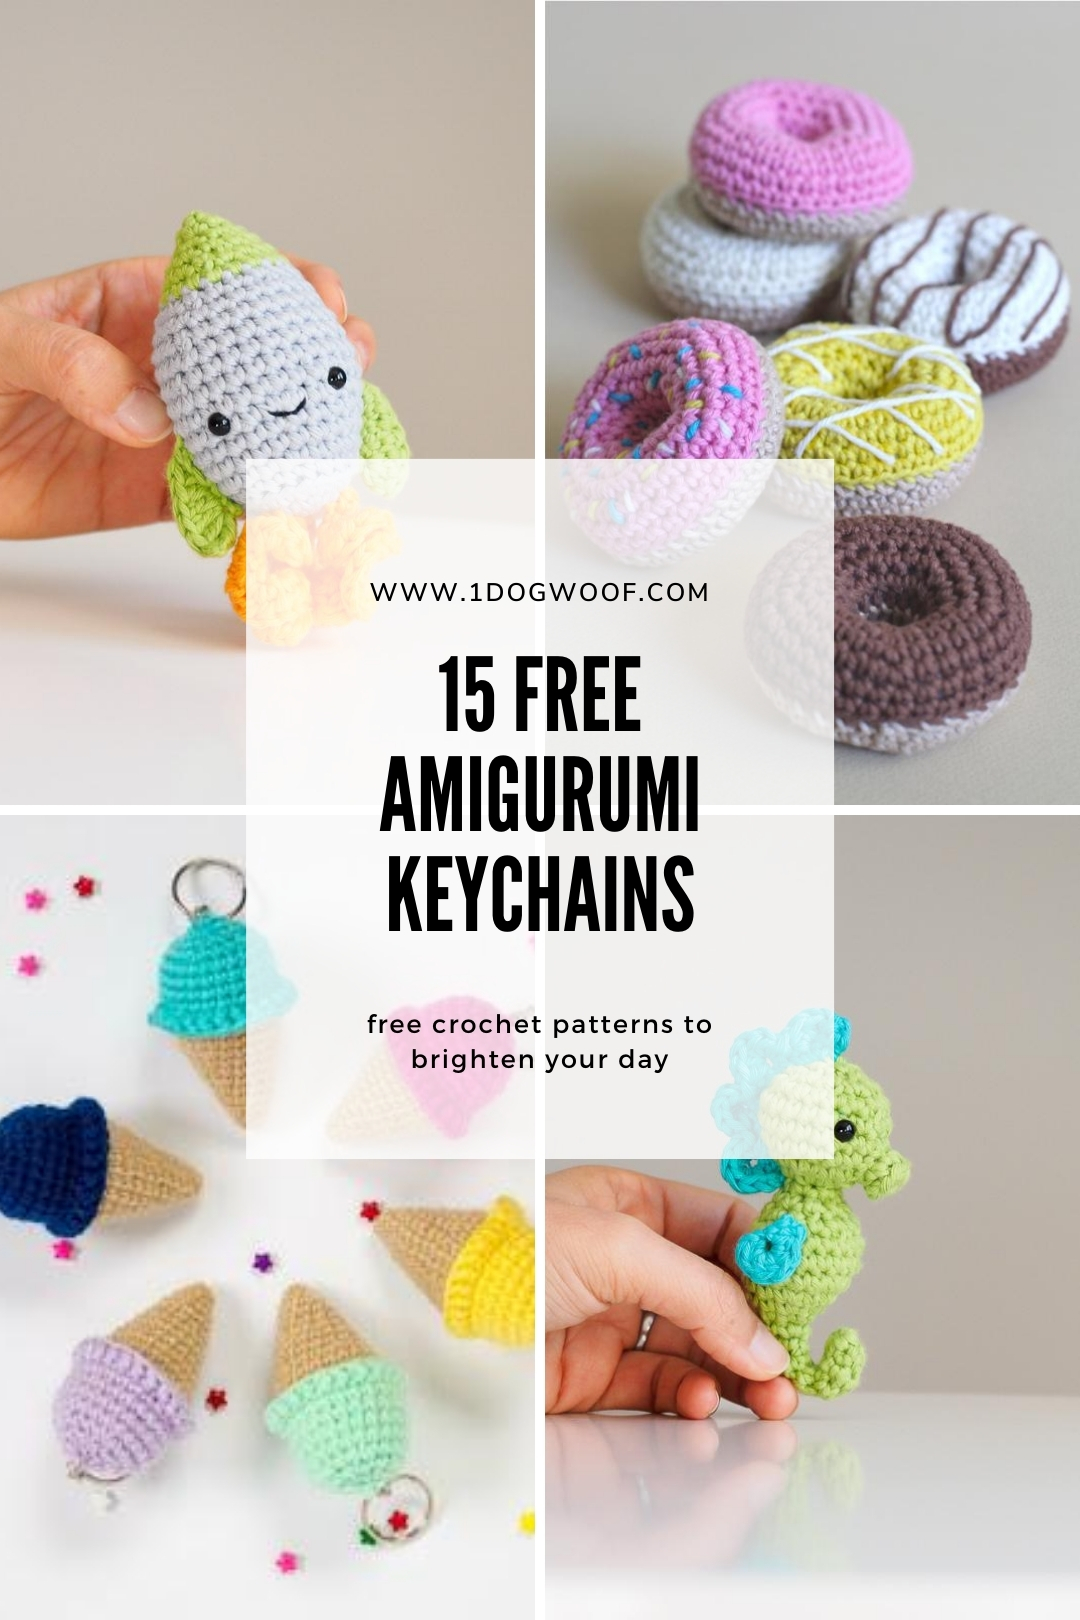 15 Free Must-Make Amigurumi Keychains for Bags, Purses, and Keys